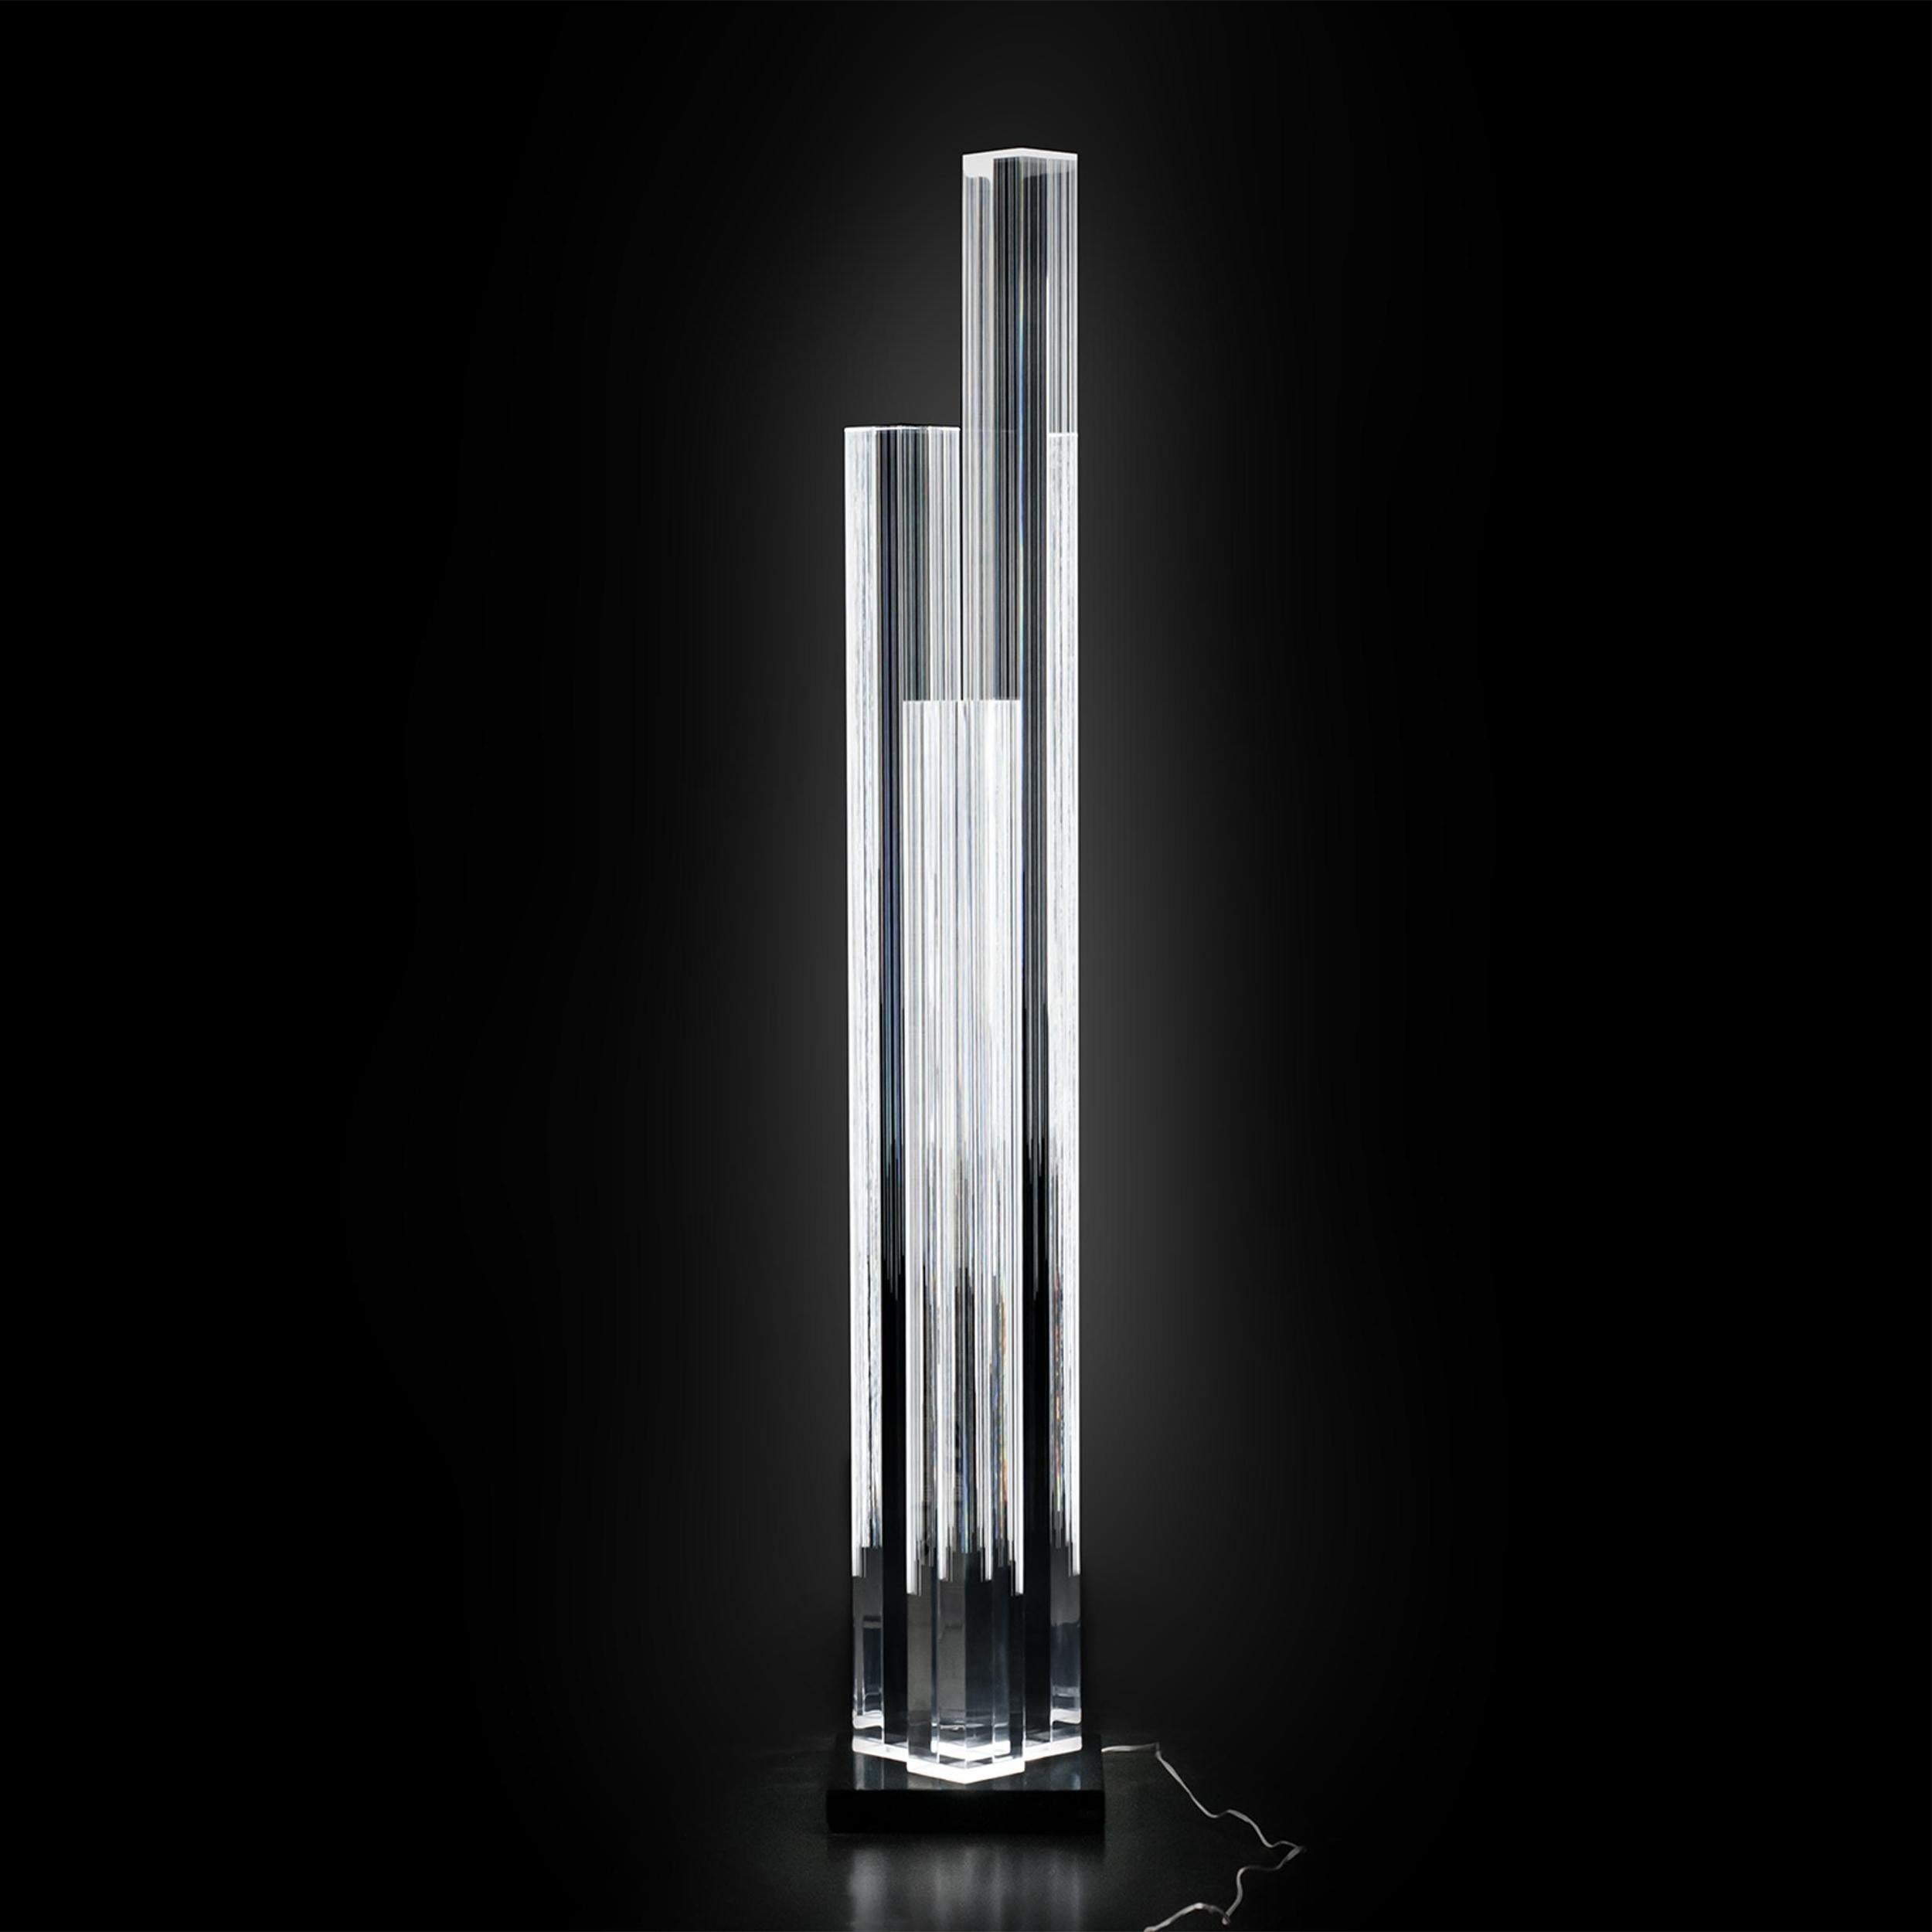 Floor Lamp Acrylic Rods is made from a single acrylic block of
laser engraved and acrylic crystal cut. Bright, solid and durable
the Acrylic Rods Floor Lamp is an elegant designed floor lamp,
led lighted body at the base. Light color temperature is